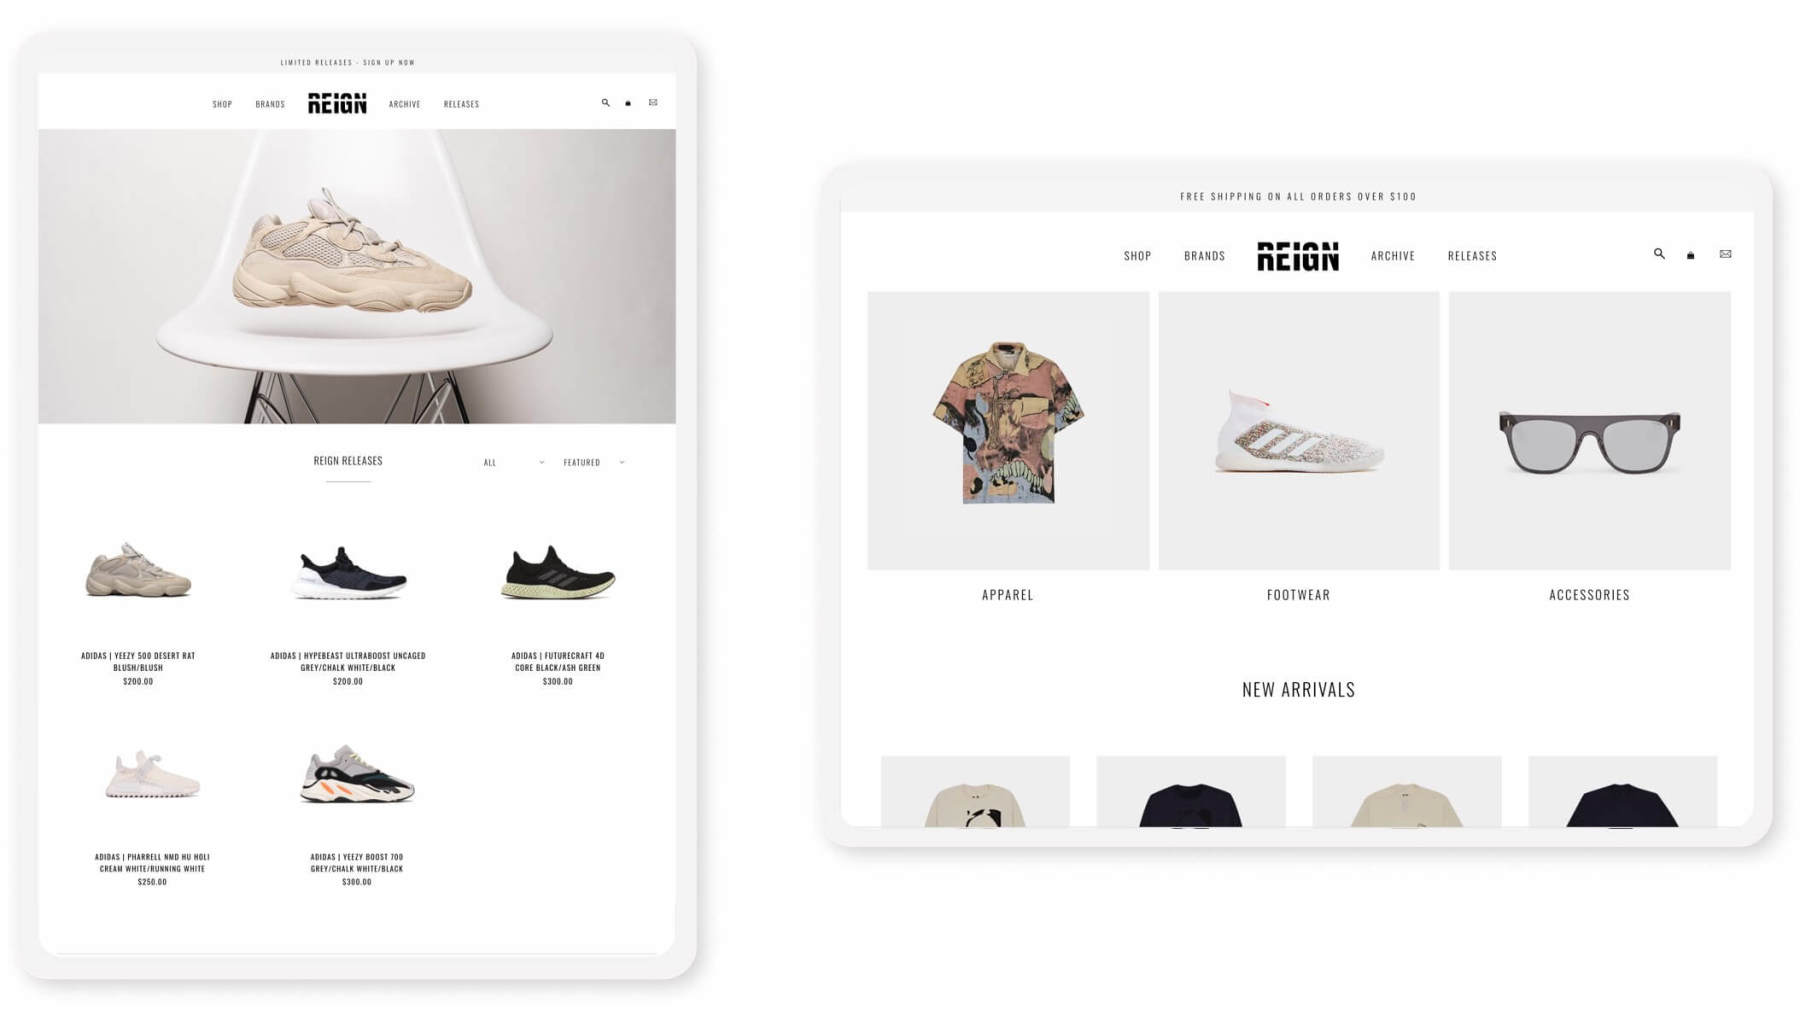 reign shopify website collection pages on tablets in portrait and landscape modes